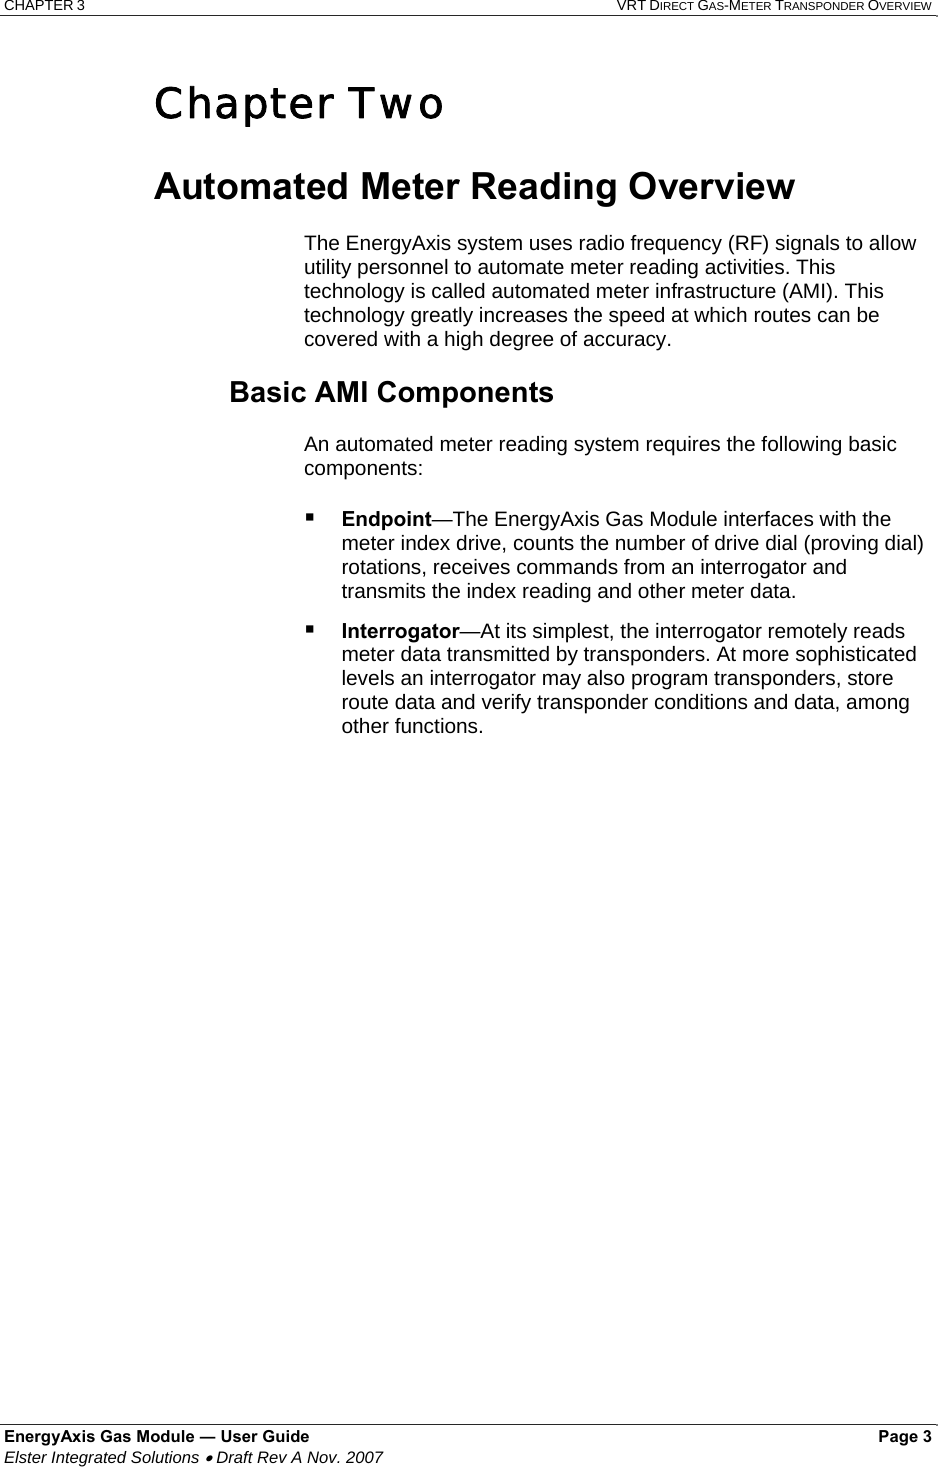 CHAPTER 3  VRT DIRECT GAS-METER TRANSPONDER OVERVIEW EnergyAxis Gas Module ― User Guide   Page 3  Elster Integrated Solutions • Draft Rev A Nov. 2007  Chapter Two  Automated Meter Reading Overview  The EnergyAxis system uses radio frequency (RF) signals to allow utility personnel to automate meter reading activities. This technology is called automated meter infrastructure (AMI). This technology greatly increases the speed at which routes can be covered with a high degree of accuracy.  Basic AMI Components  An automated meter reading system requires the following basic components:   Endpoint—The EnergyAxis Gas Module interfaces with the meter index drive, counts the number of drive dial (proving dial) rotations, receives commands from an interrogator and transmits the index reading and other meter data.  Interrogator—At its simplest, the interrogator remotely reads meter data transmitted by transponders. At more sophisticated levels an interrogator may also program transponders, store route data and verify transponder conditions and data, among other functions. 